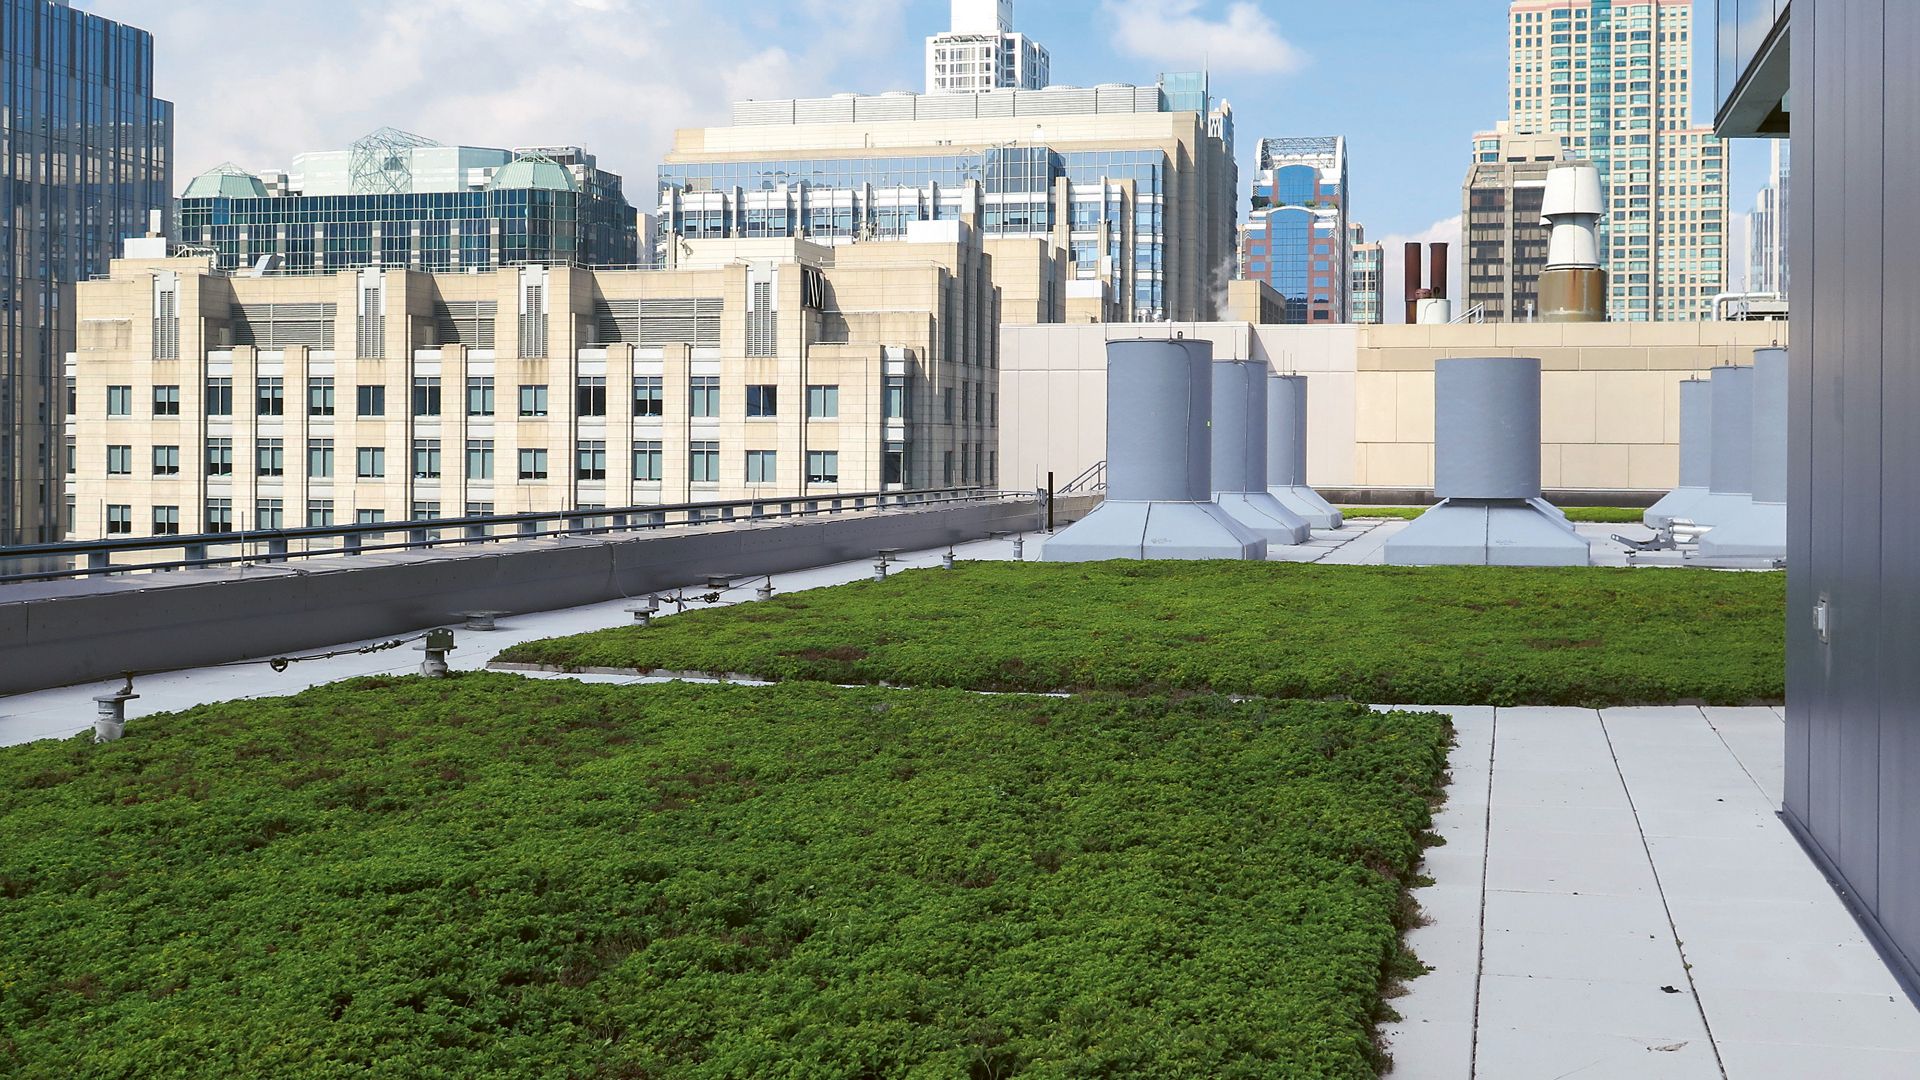 The green roof of Northwestern University’s Simpson Querrey Biomedical Research Center in Chicago